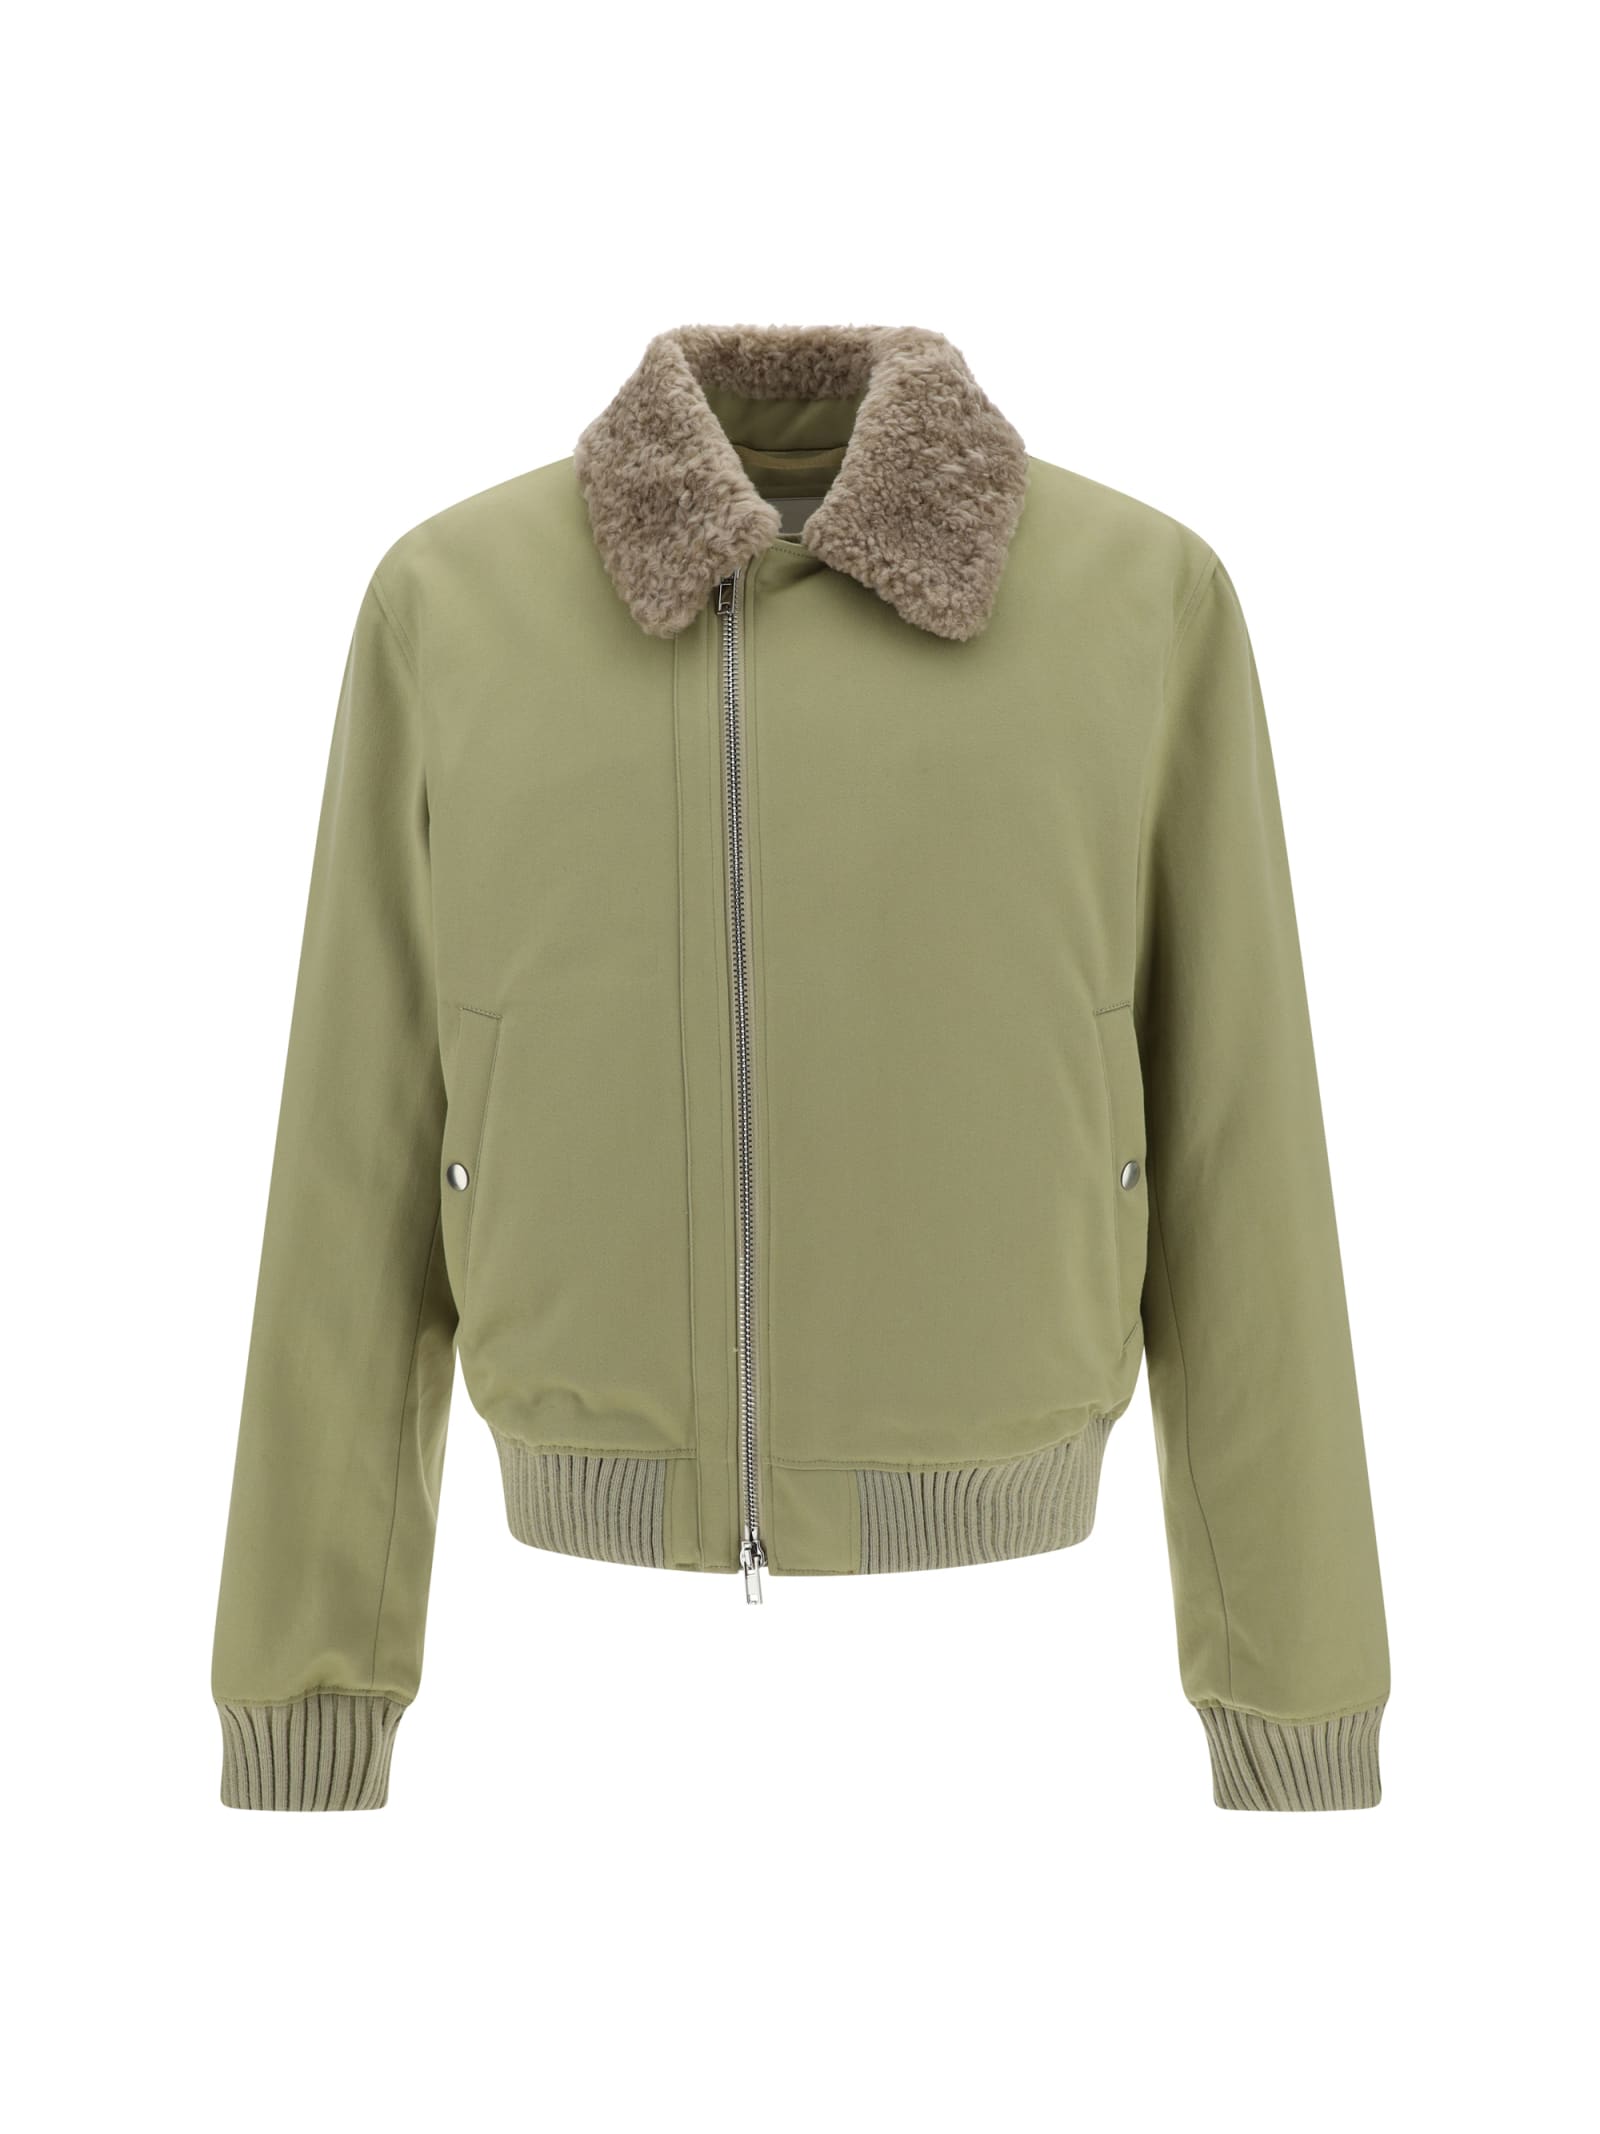 Burberry Bomber Jacket In Neutral